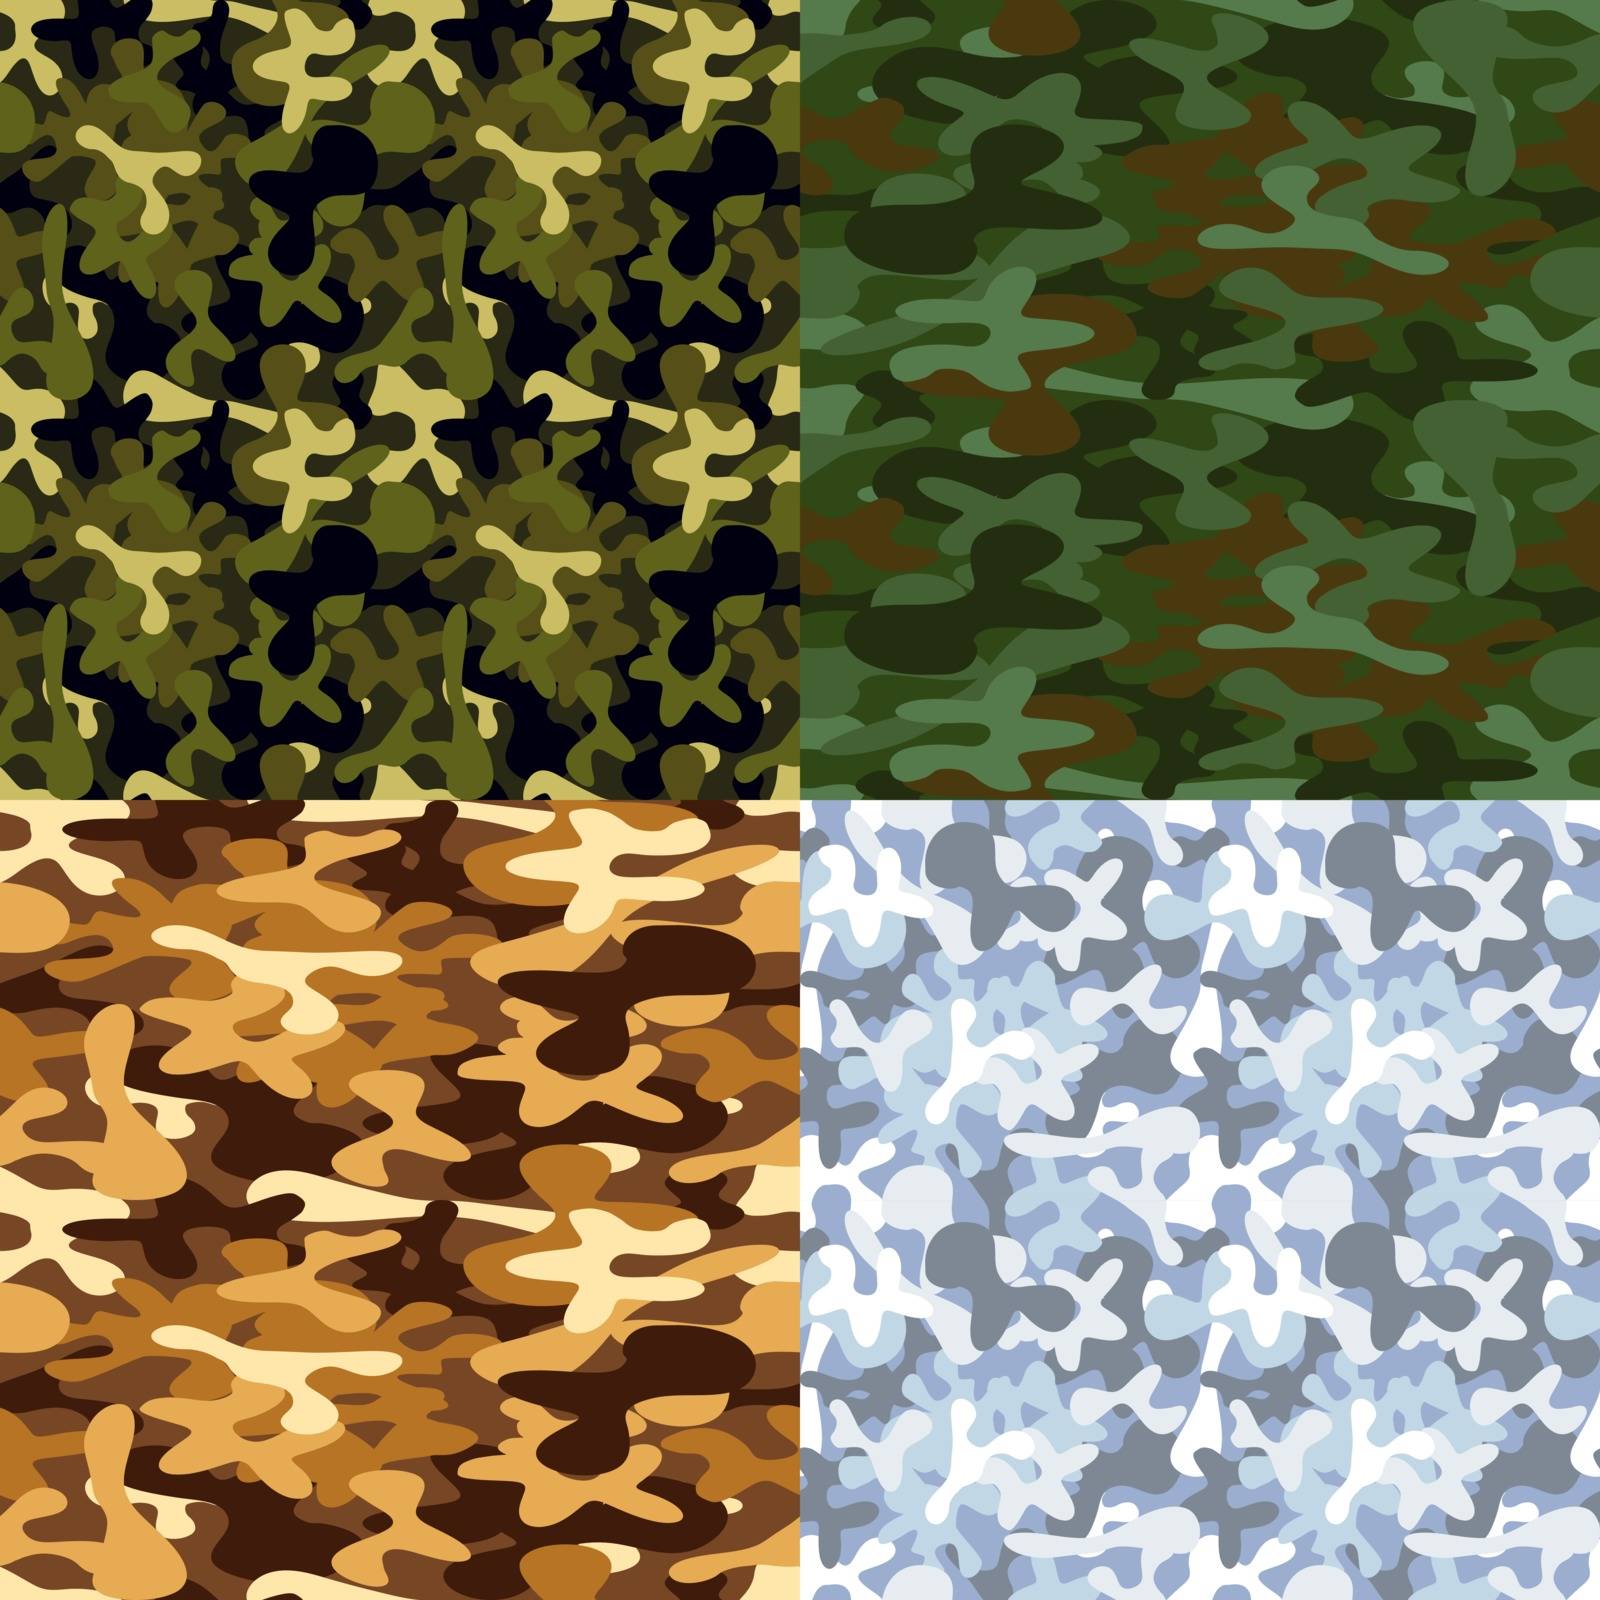 Set of military camouflage seamless patterns by Evgeny89